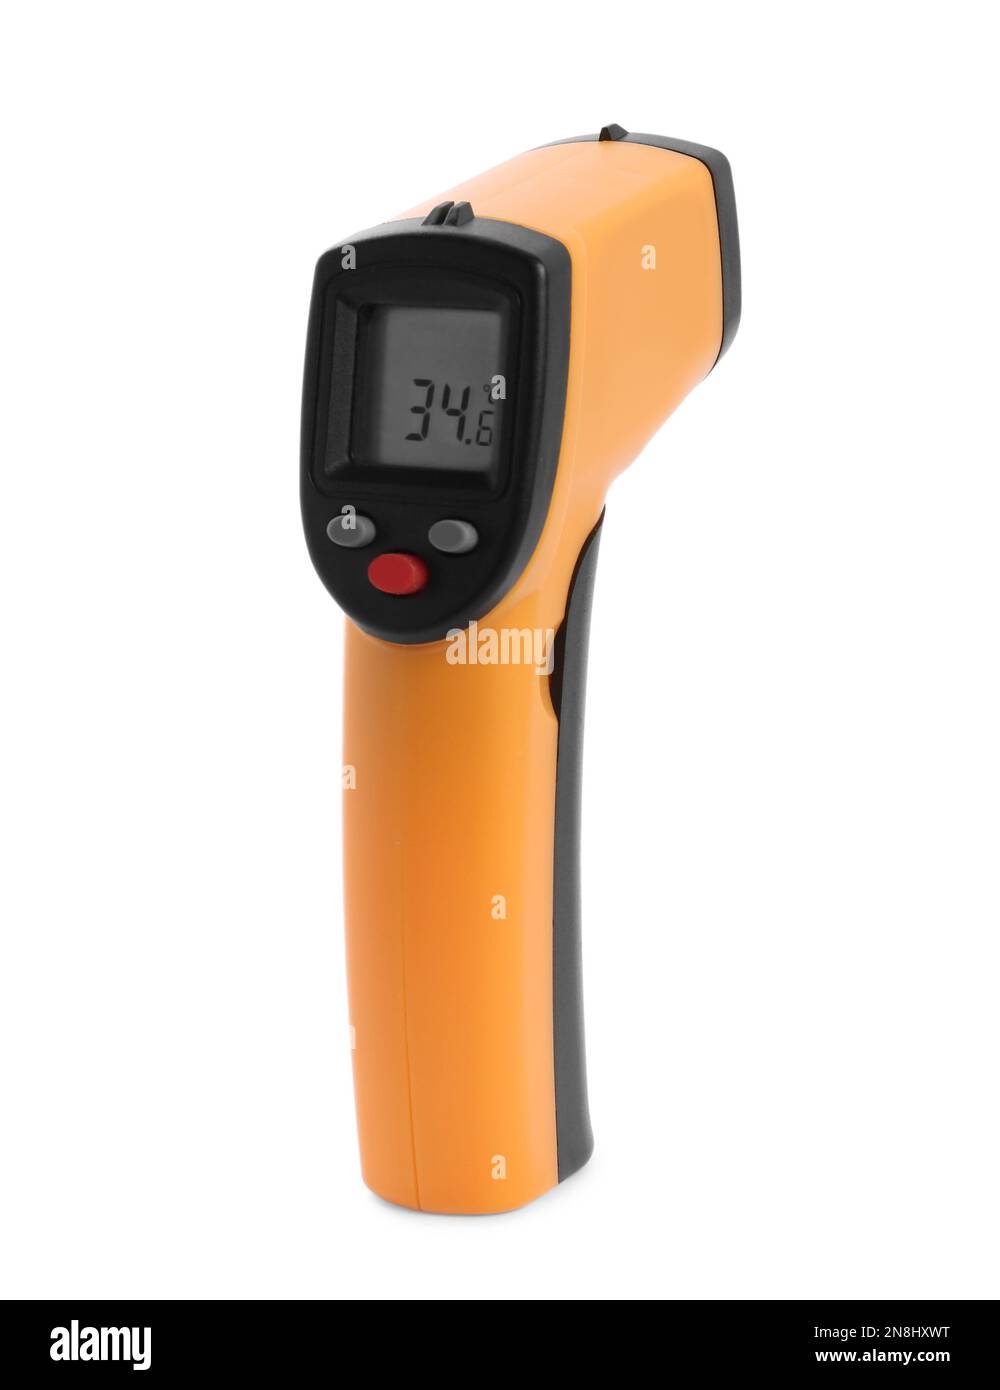 https://c8.alamy.com/comp/2N8HXWT/infrared-thermometer-isolated-on-white-checking-temperature-during-covid-19-pandemic-2N8HXWT.jpg